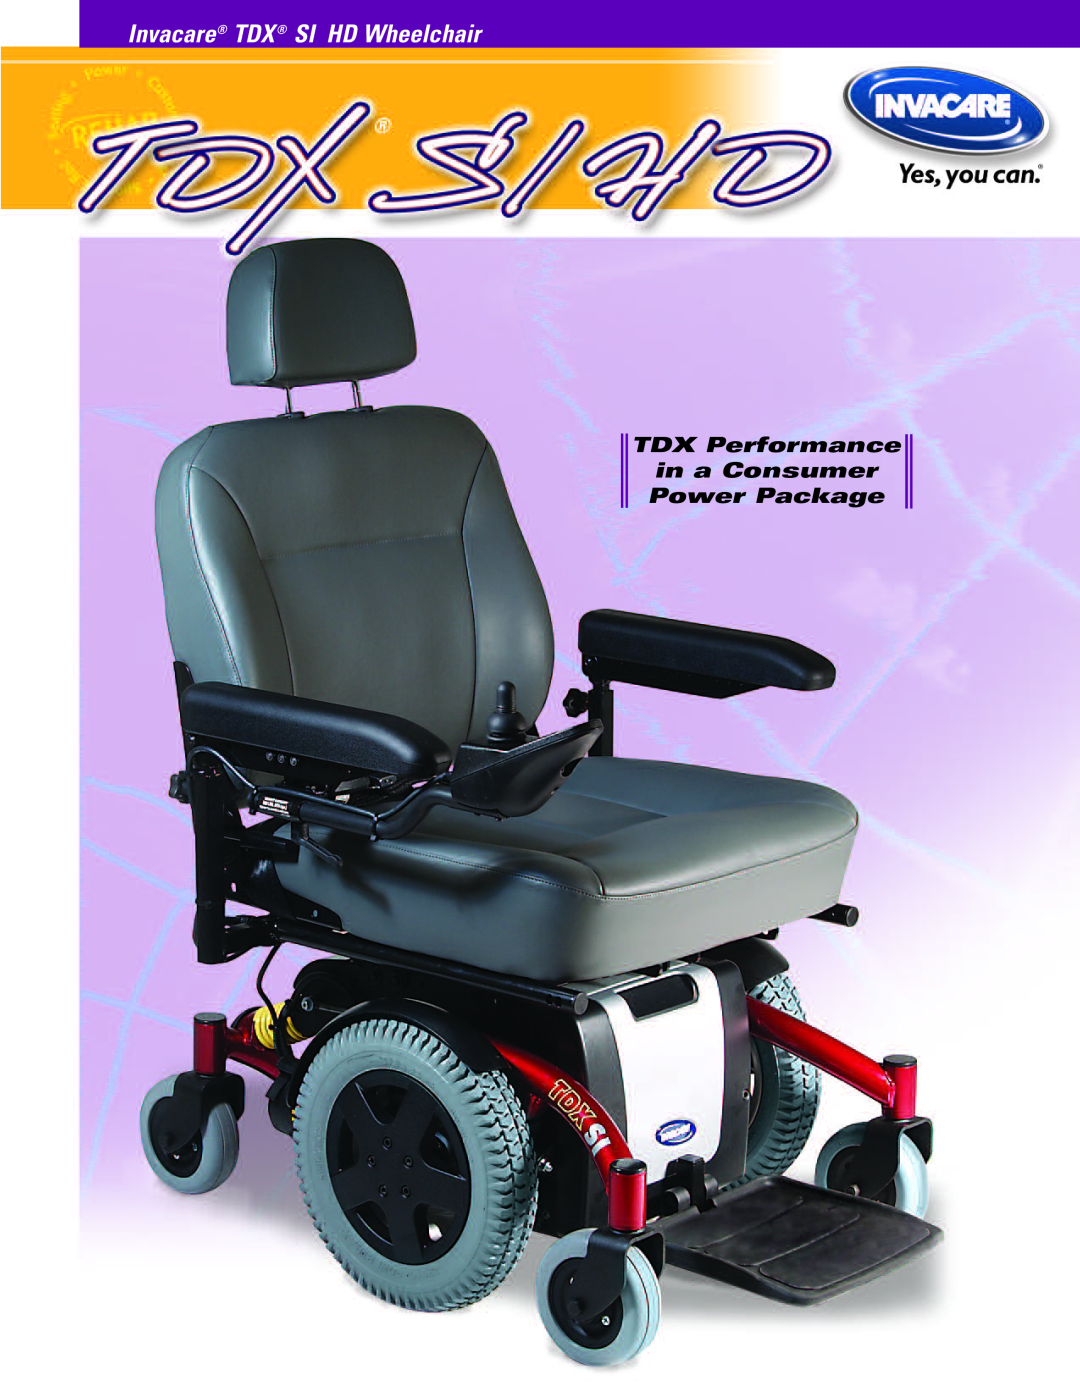 Invacare TDX SI-HD, TDXSI-HD-S manual Invacare TDX SI HD Wheelchair, TDX Performance in a Consumer Power Package 